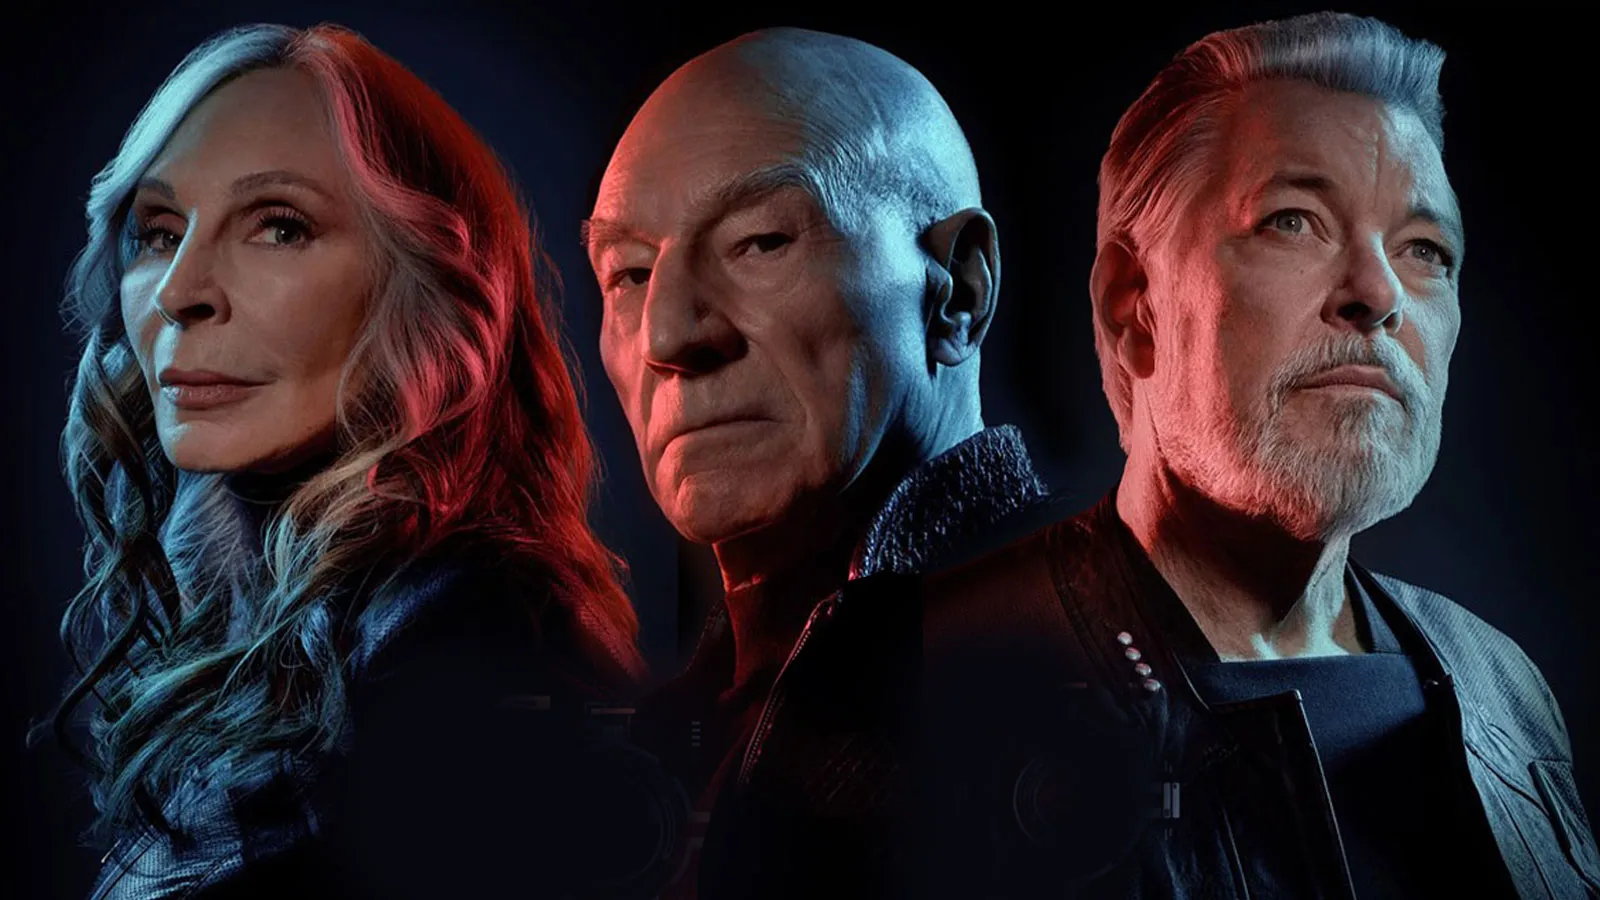 Promotional image for 'Star Trek: Picard' featuring (l-r) Gates McFadden as Beverly Crusher, Patrick Stewart as Jean-luc Picard, and Jonathan Frakes as William Riker. We see them from the shoulders up and they are against a black background. They are Photoshopped together with Crusher and Riker standing with their backs to Picard, who stands at an angle, but faces the camera. Crusher is a white woman with long red hair that has thick white streaks in it. She wears all black. Picard is a bald white man also in all black. Riker is a white man with silver hair an da silver beard. He wears a black jacket over a navy blue shirt. 